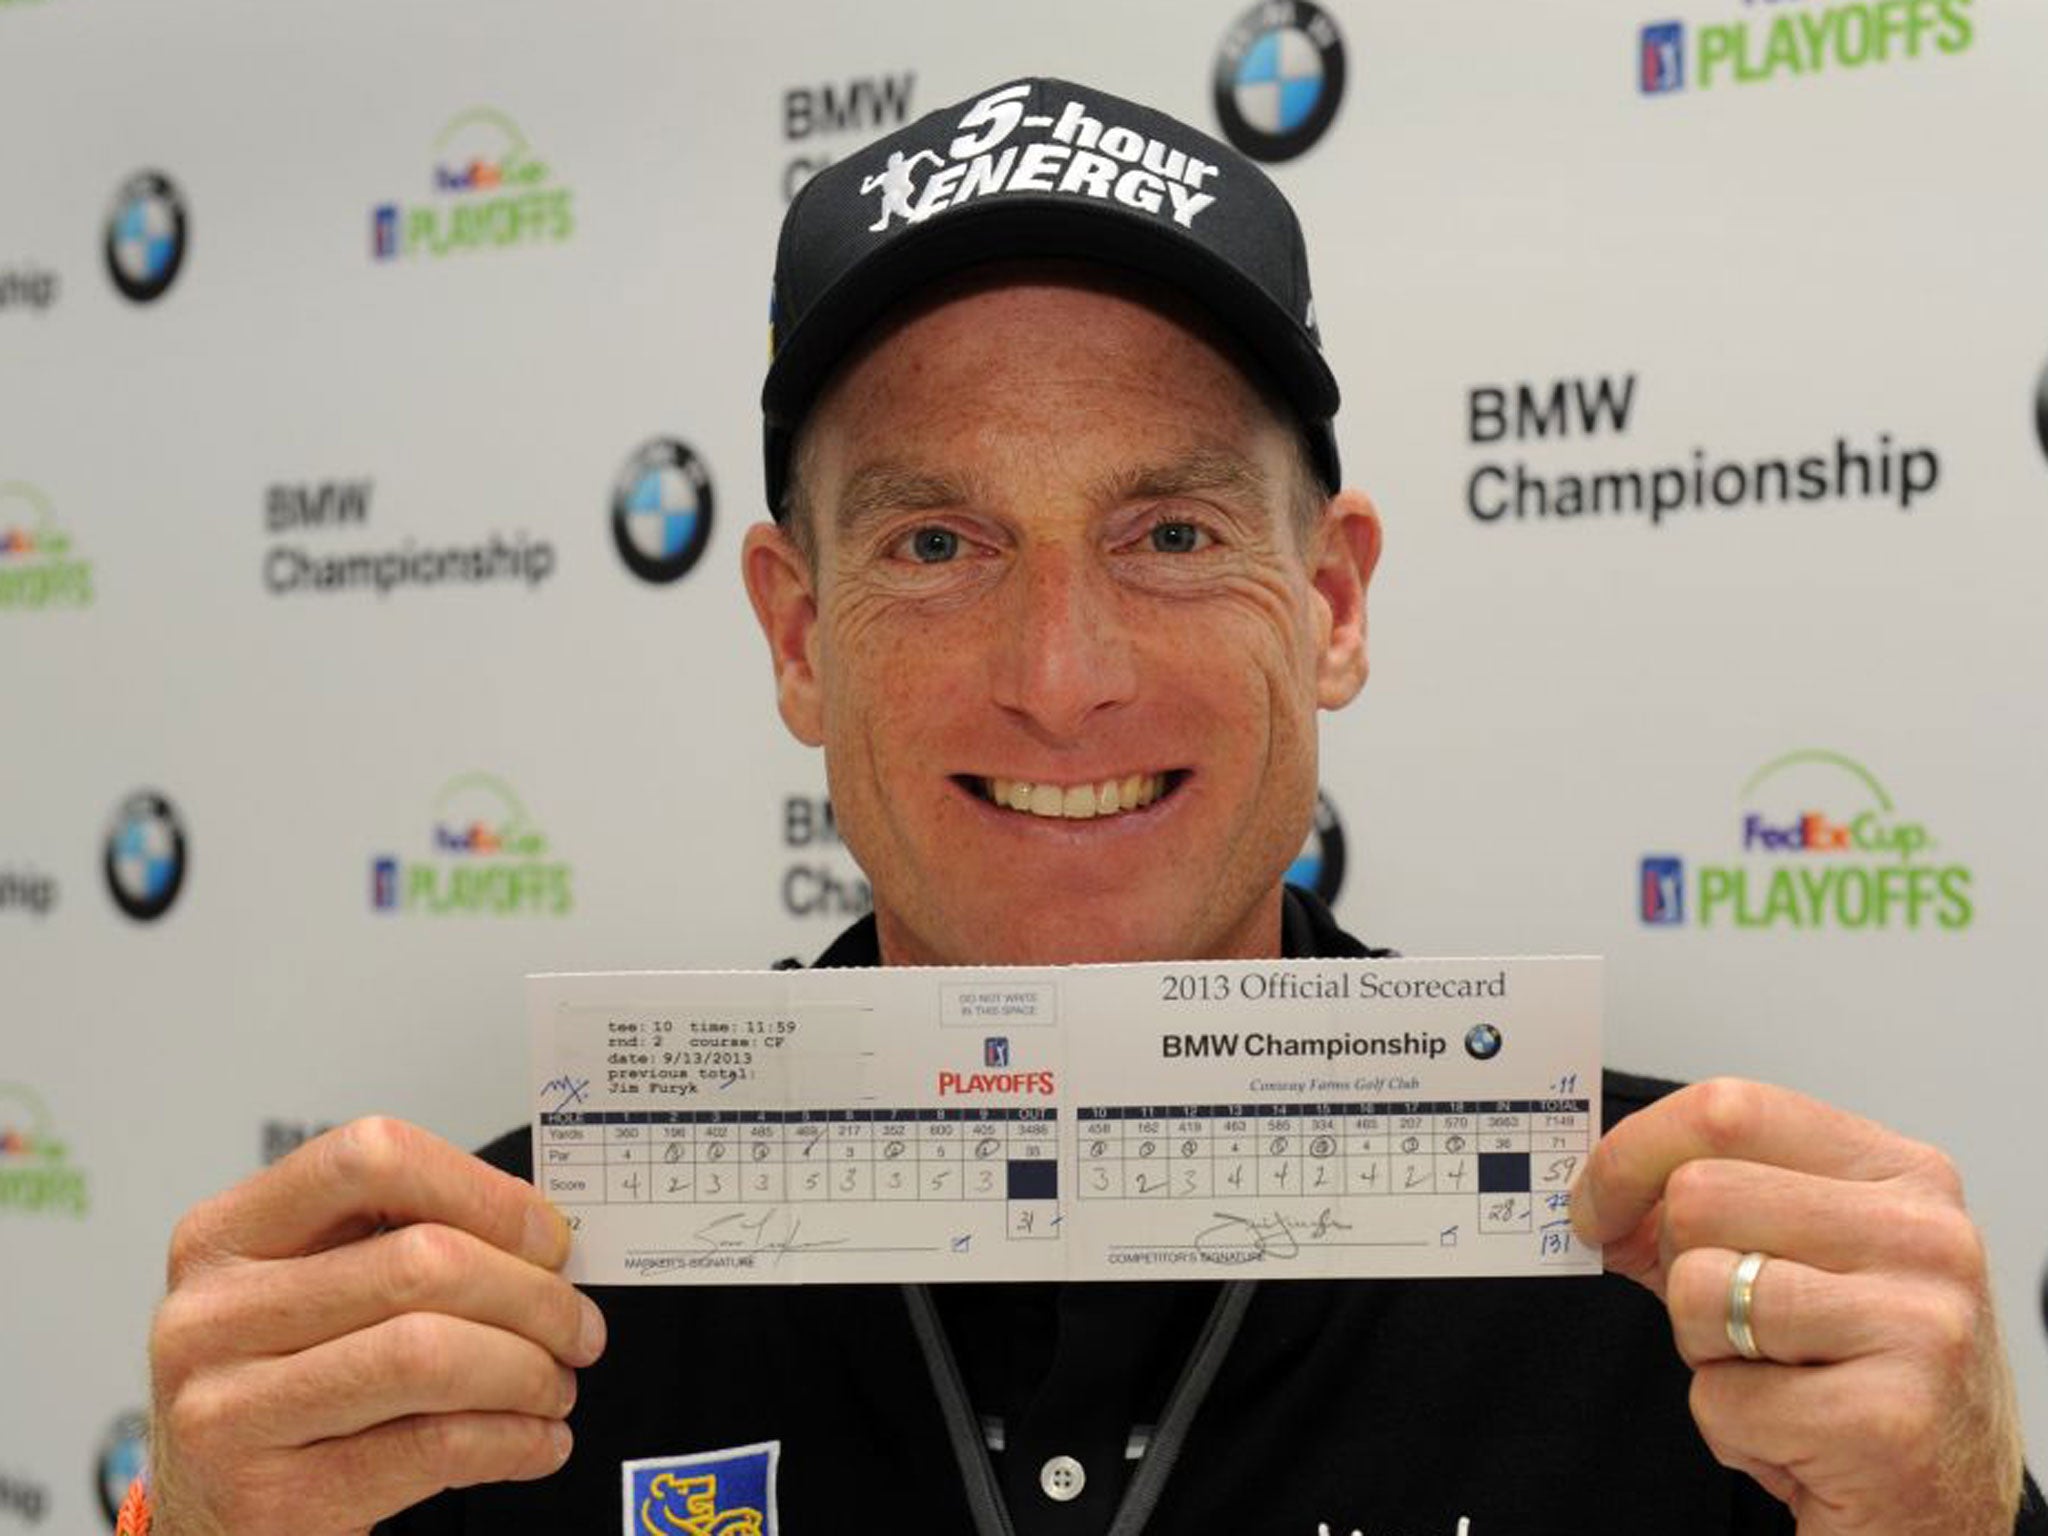 Jim Furyk poses with his score card which recorded a "59" during his second round of the BMW Championship at Conway Farms Golf Club